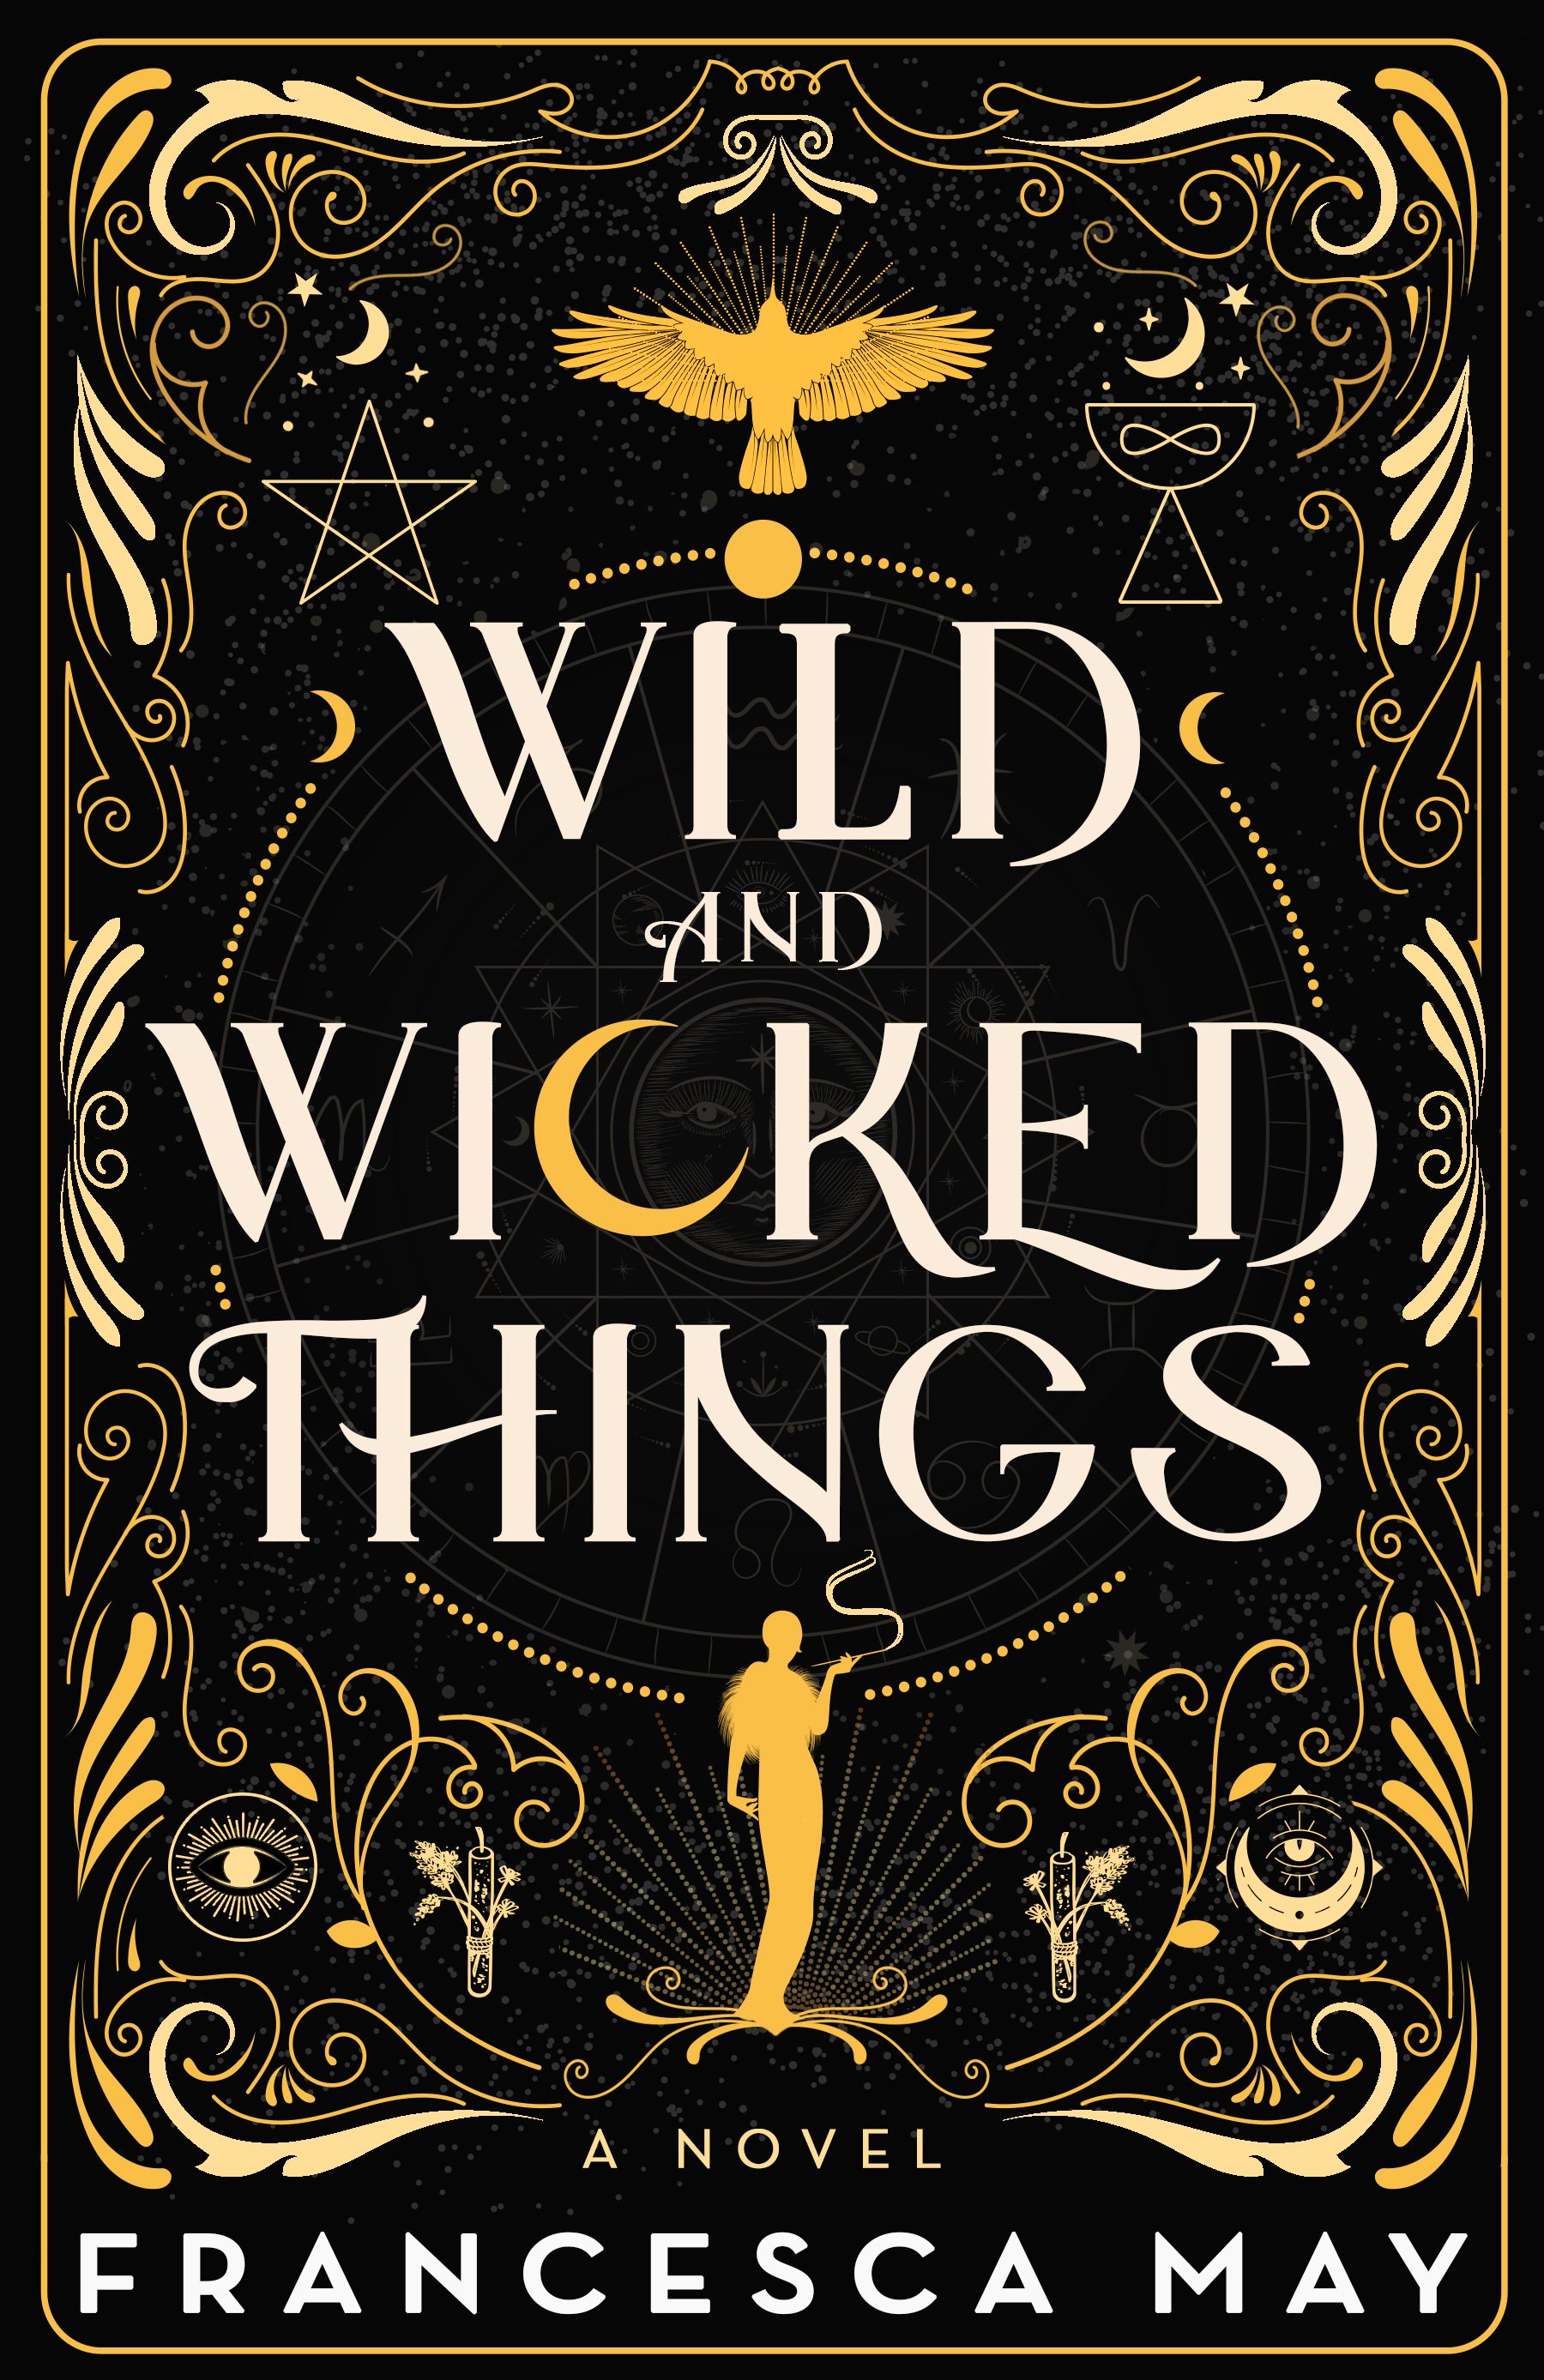 Image for "Wild and Wicked Things"